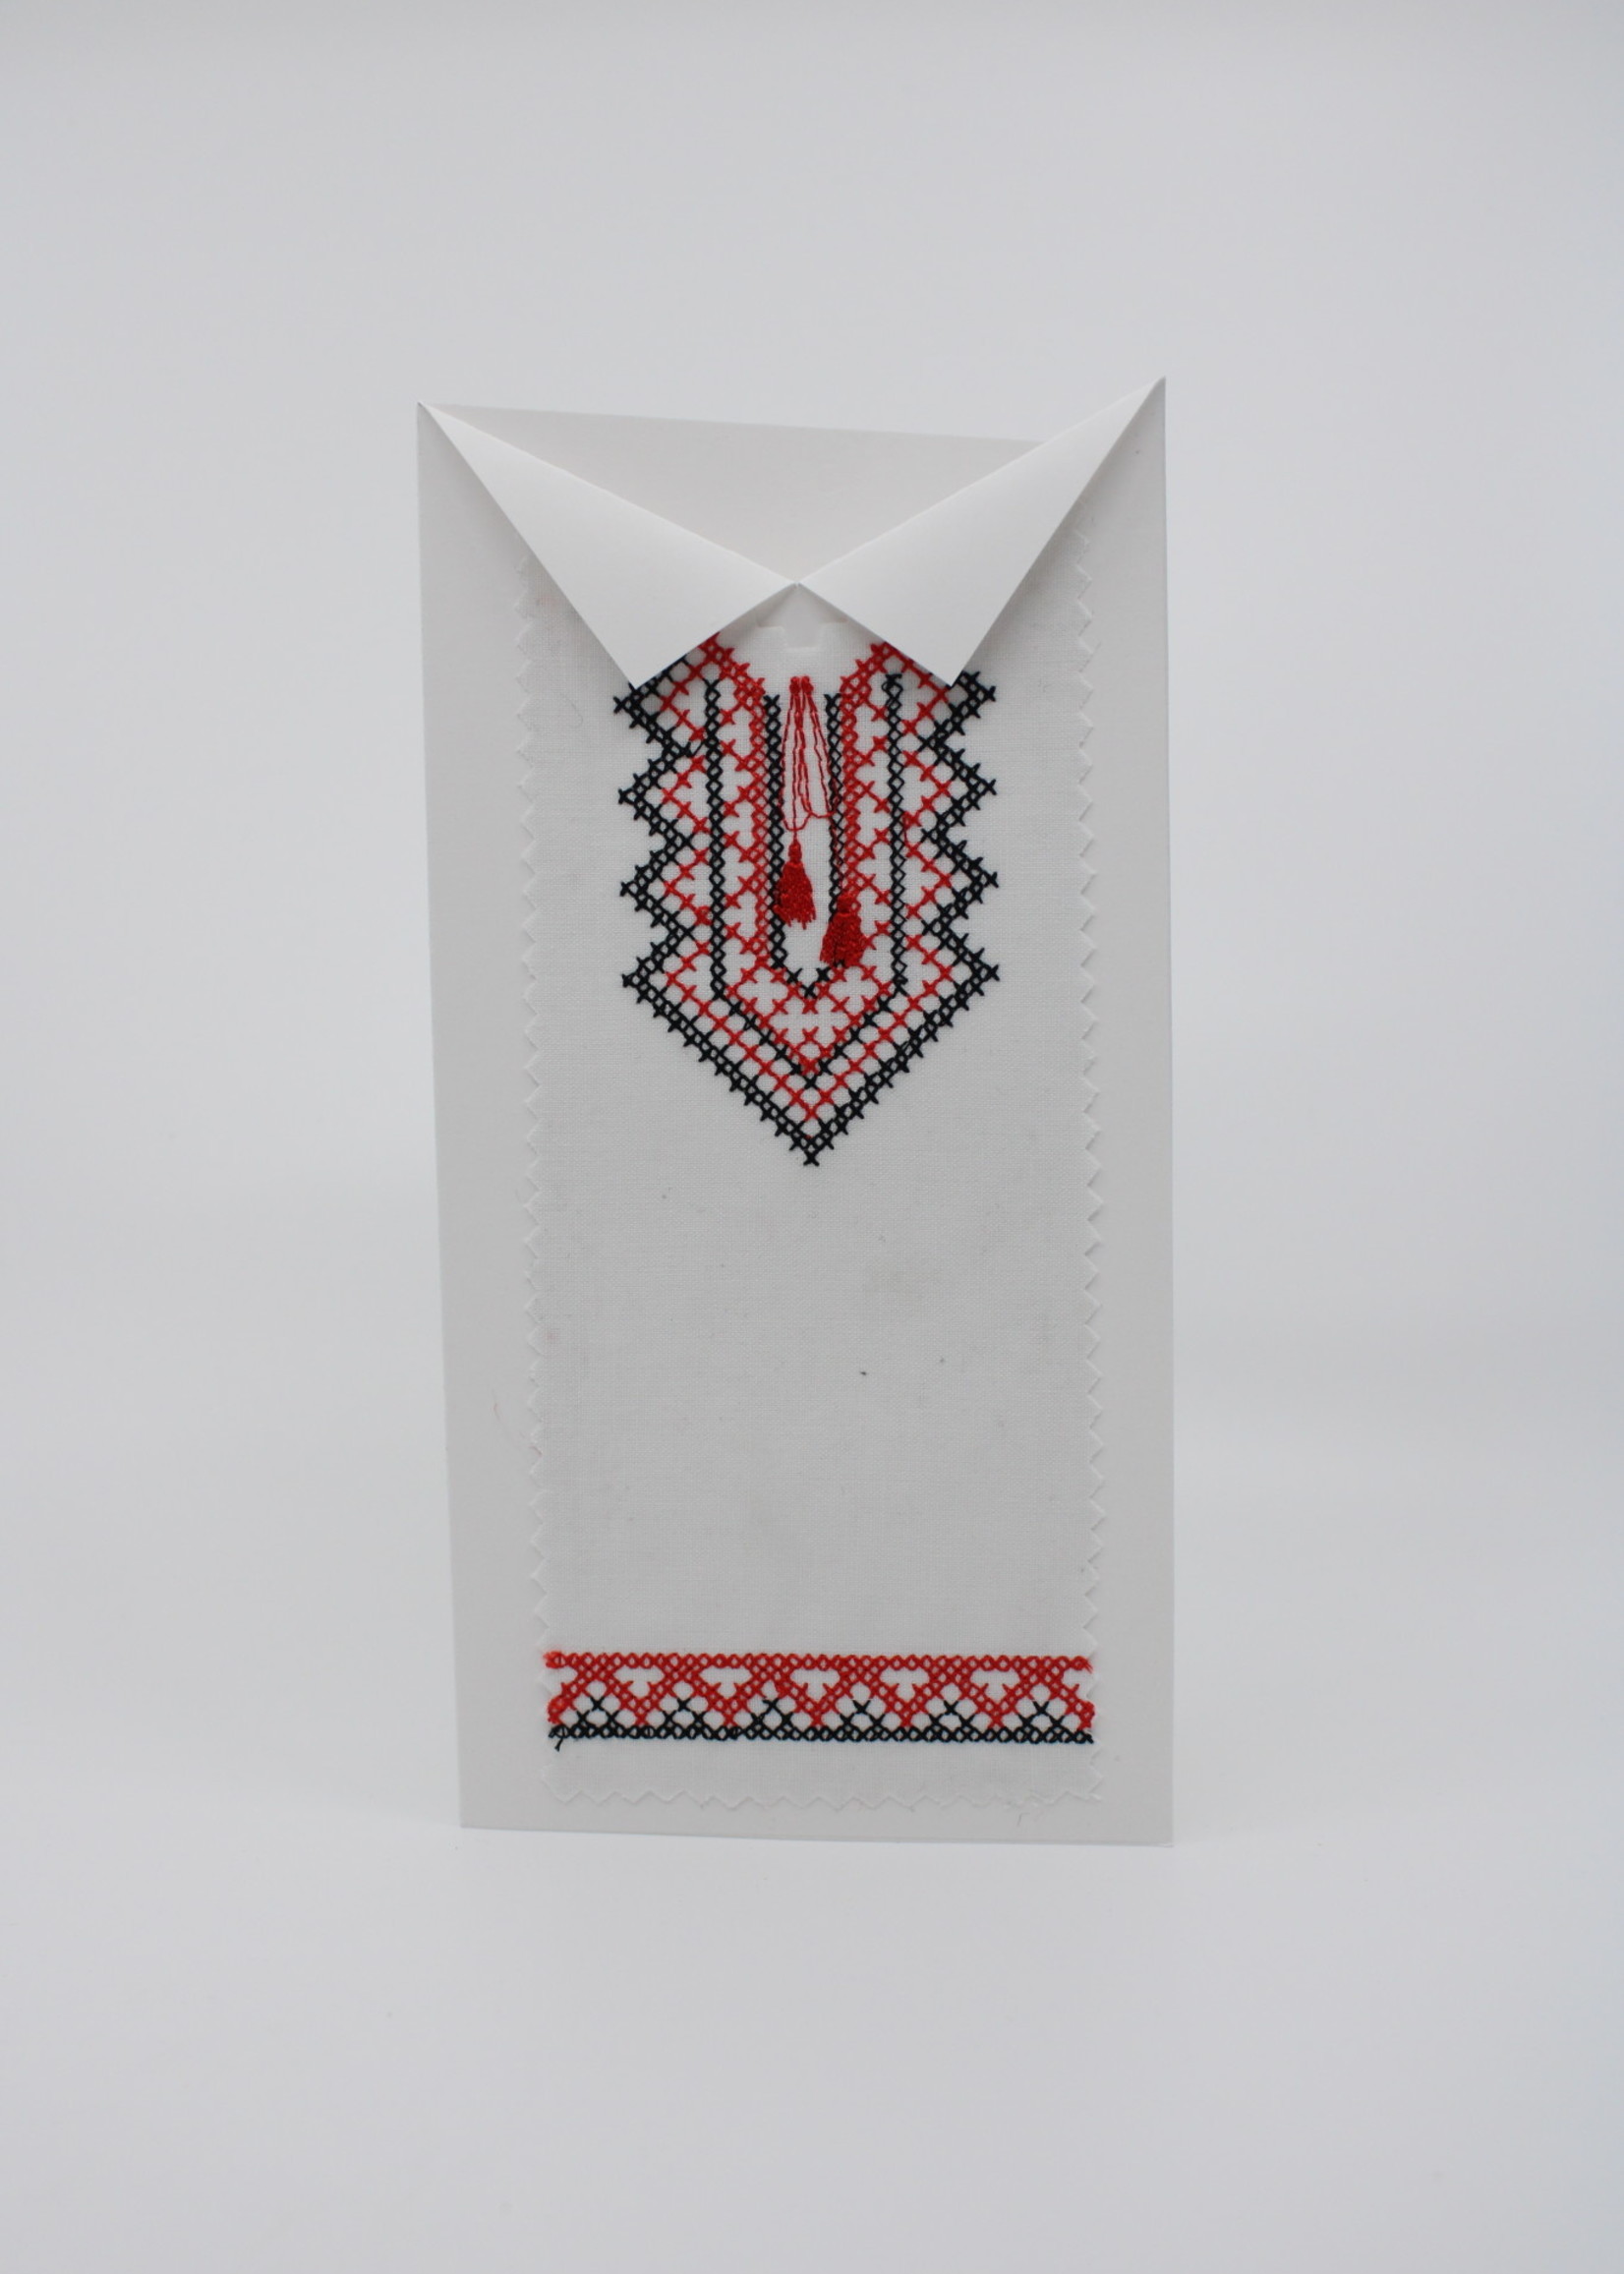 None Blank Red Tassle Embroidered Card